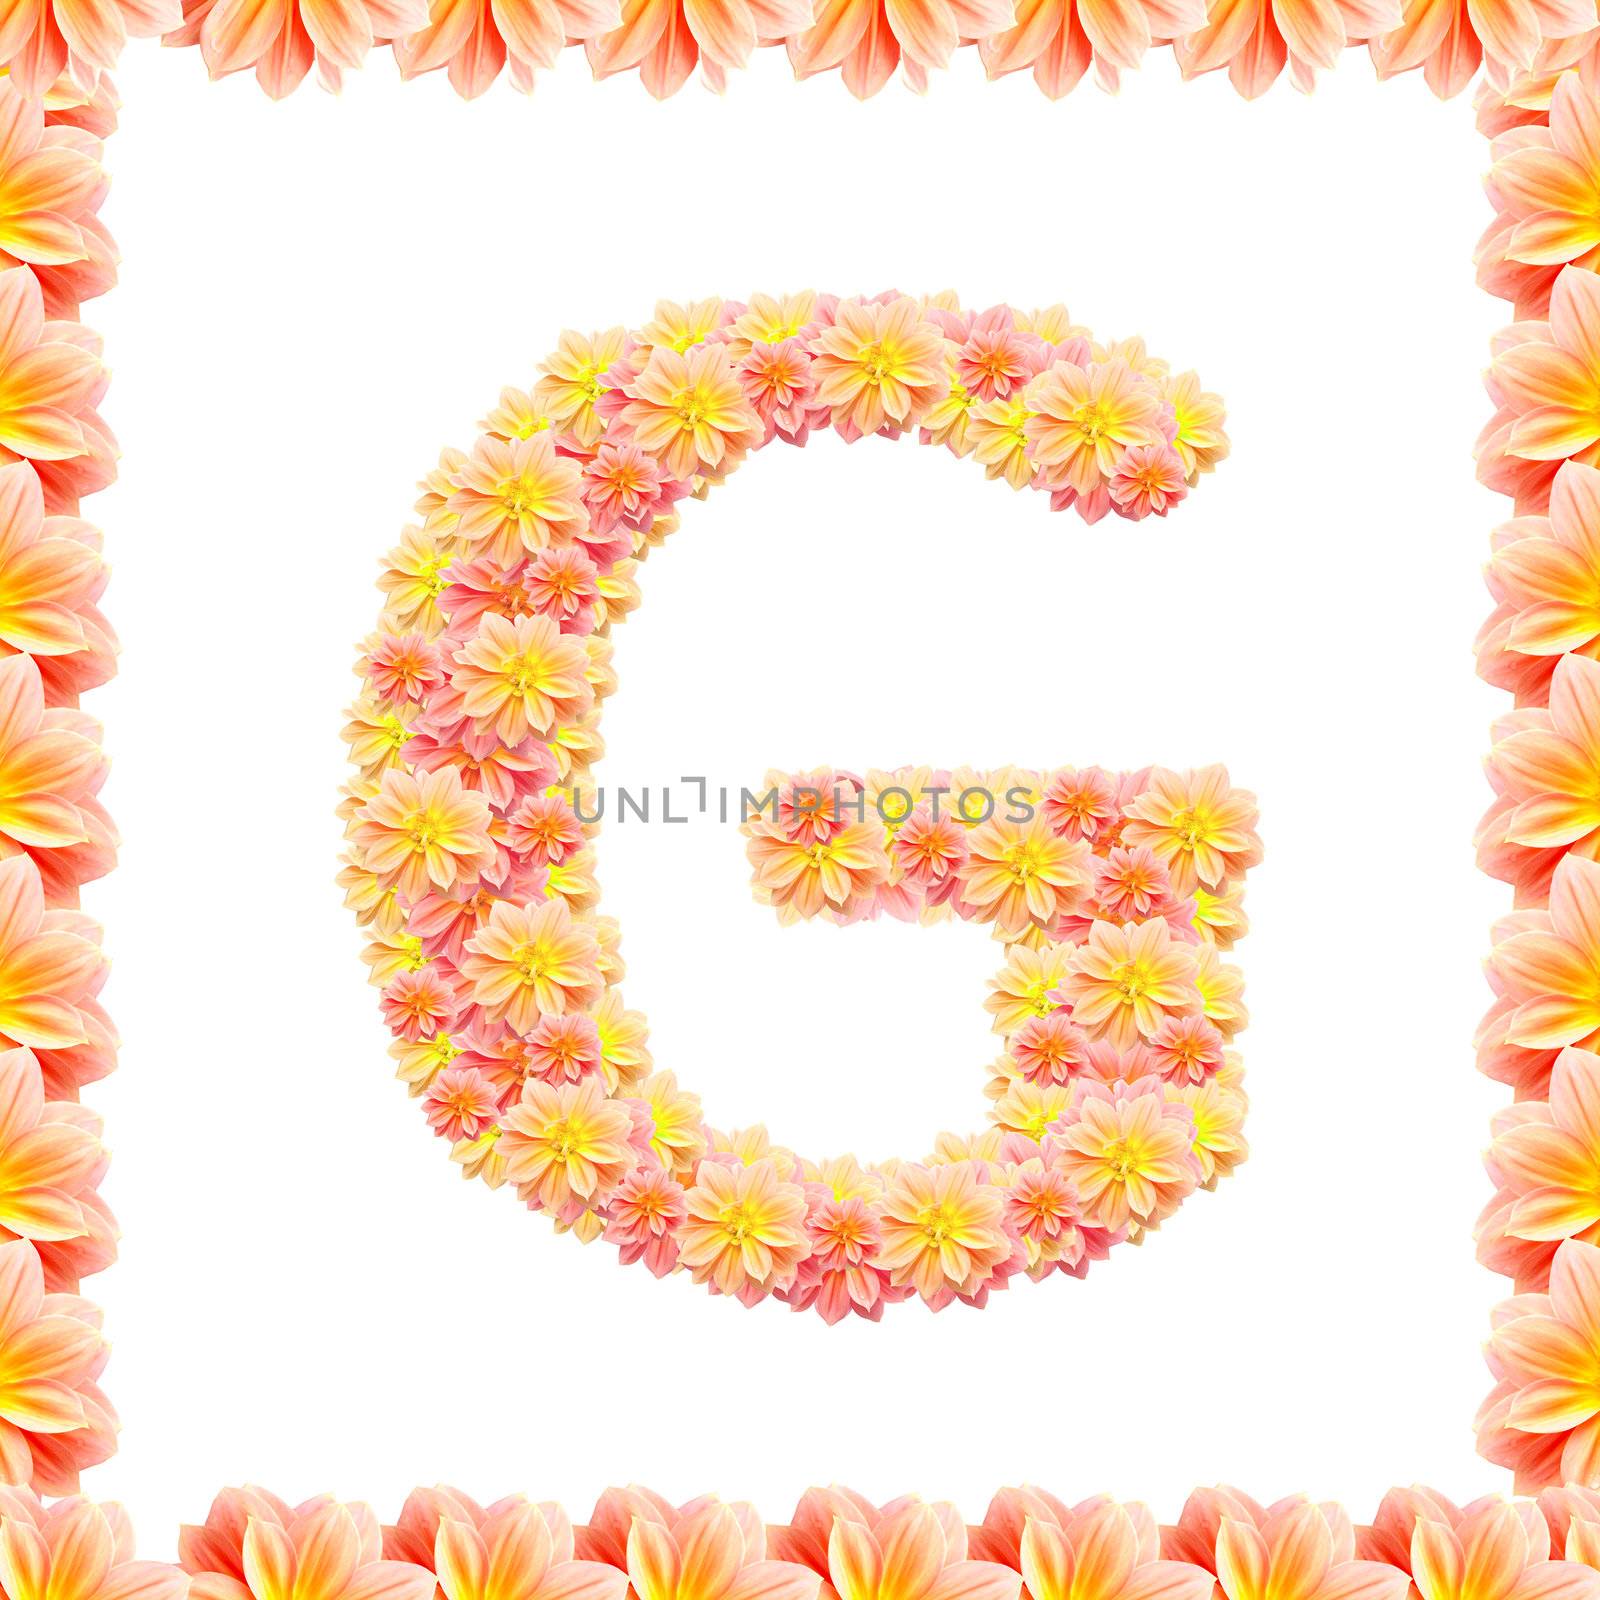 g,flower alphabet isolated on white with flame